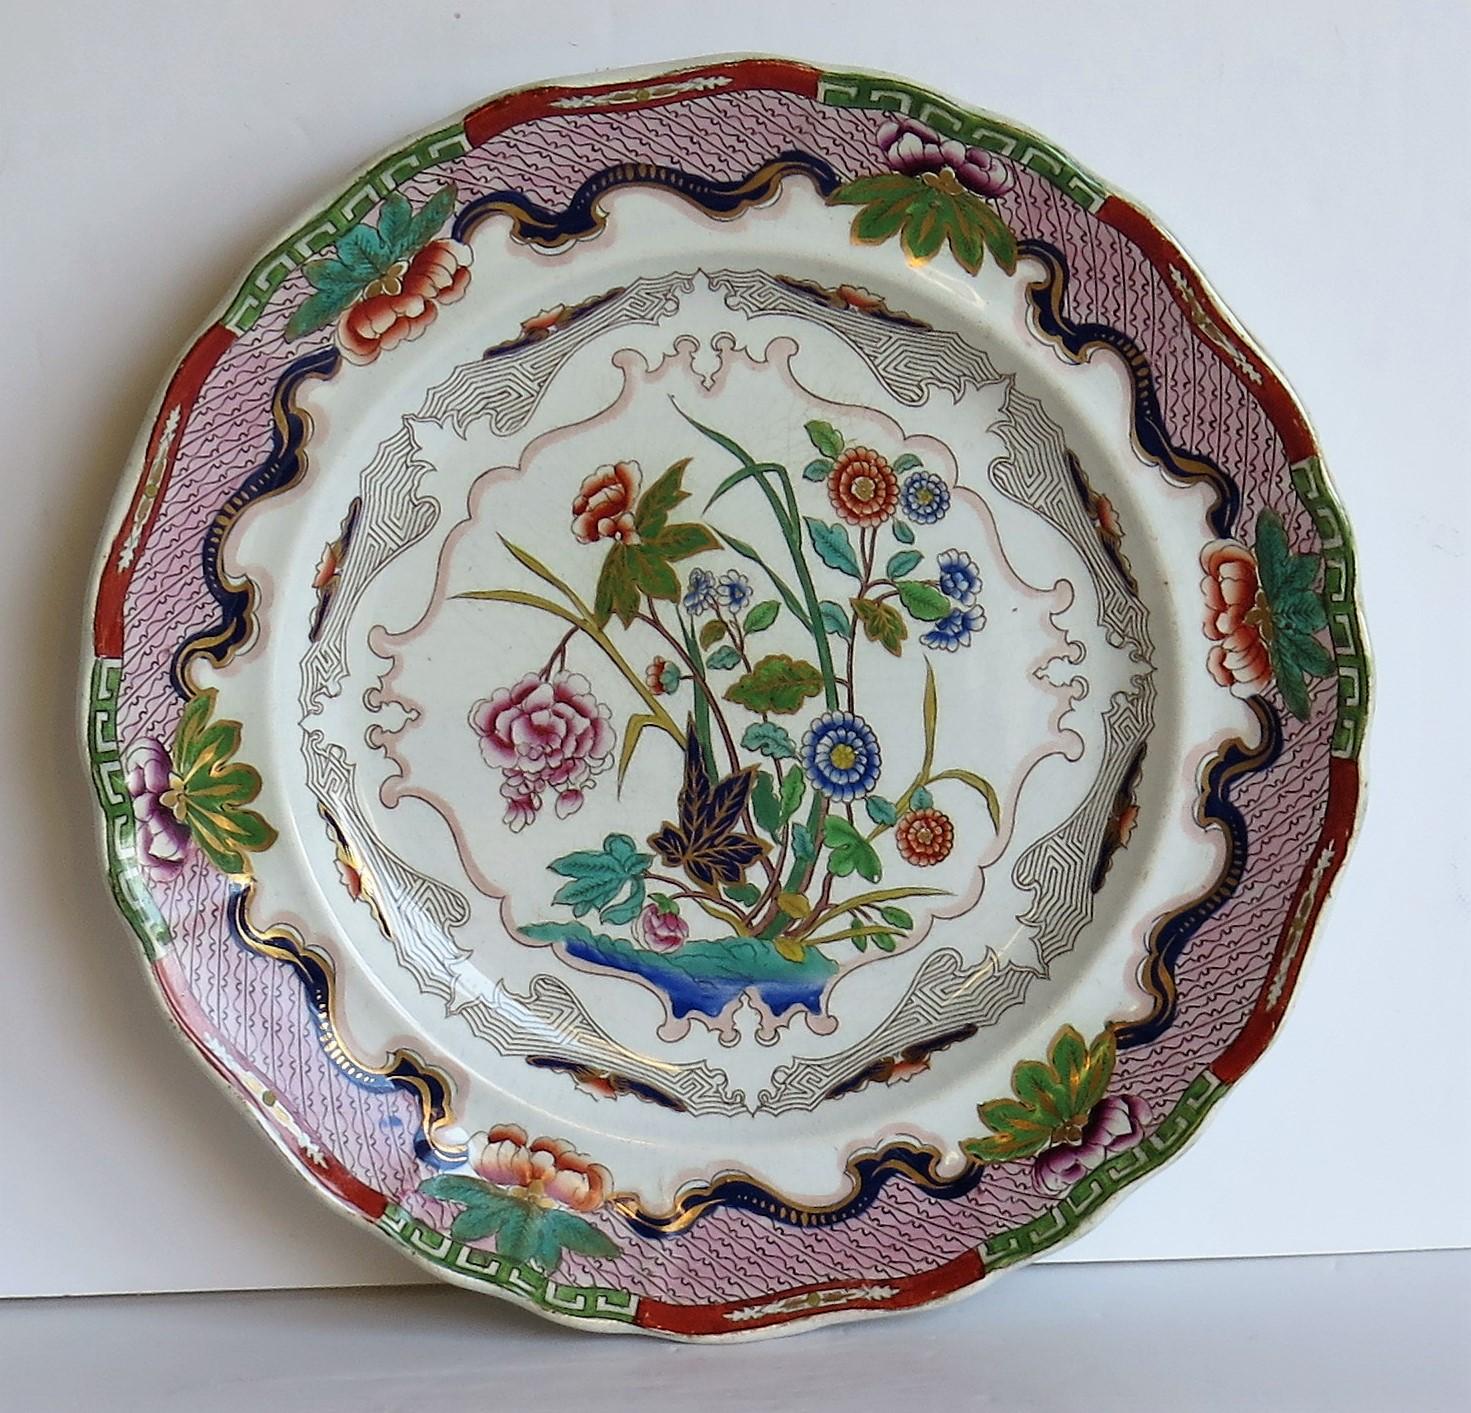 English Charles Meigh Ironstone Plate Hand Painted Floral Pattern No. 422, circa 1840